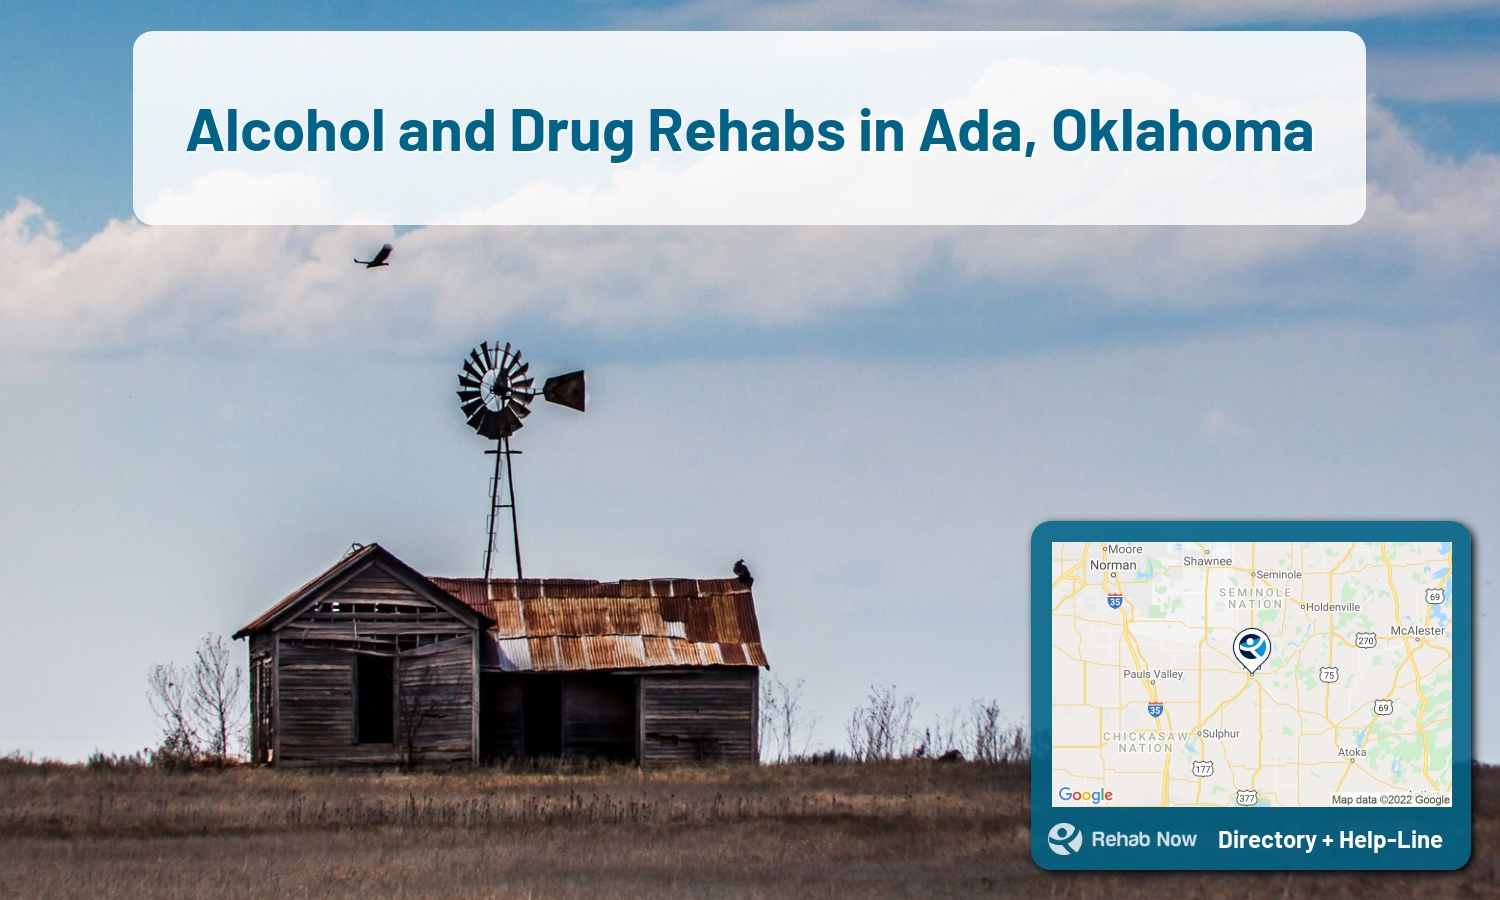 Ada, OK Treatment Centers. Find drug rehab in Ada, Oklahoma, or detox and treatment programs. Get the right help now!